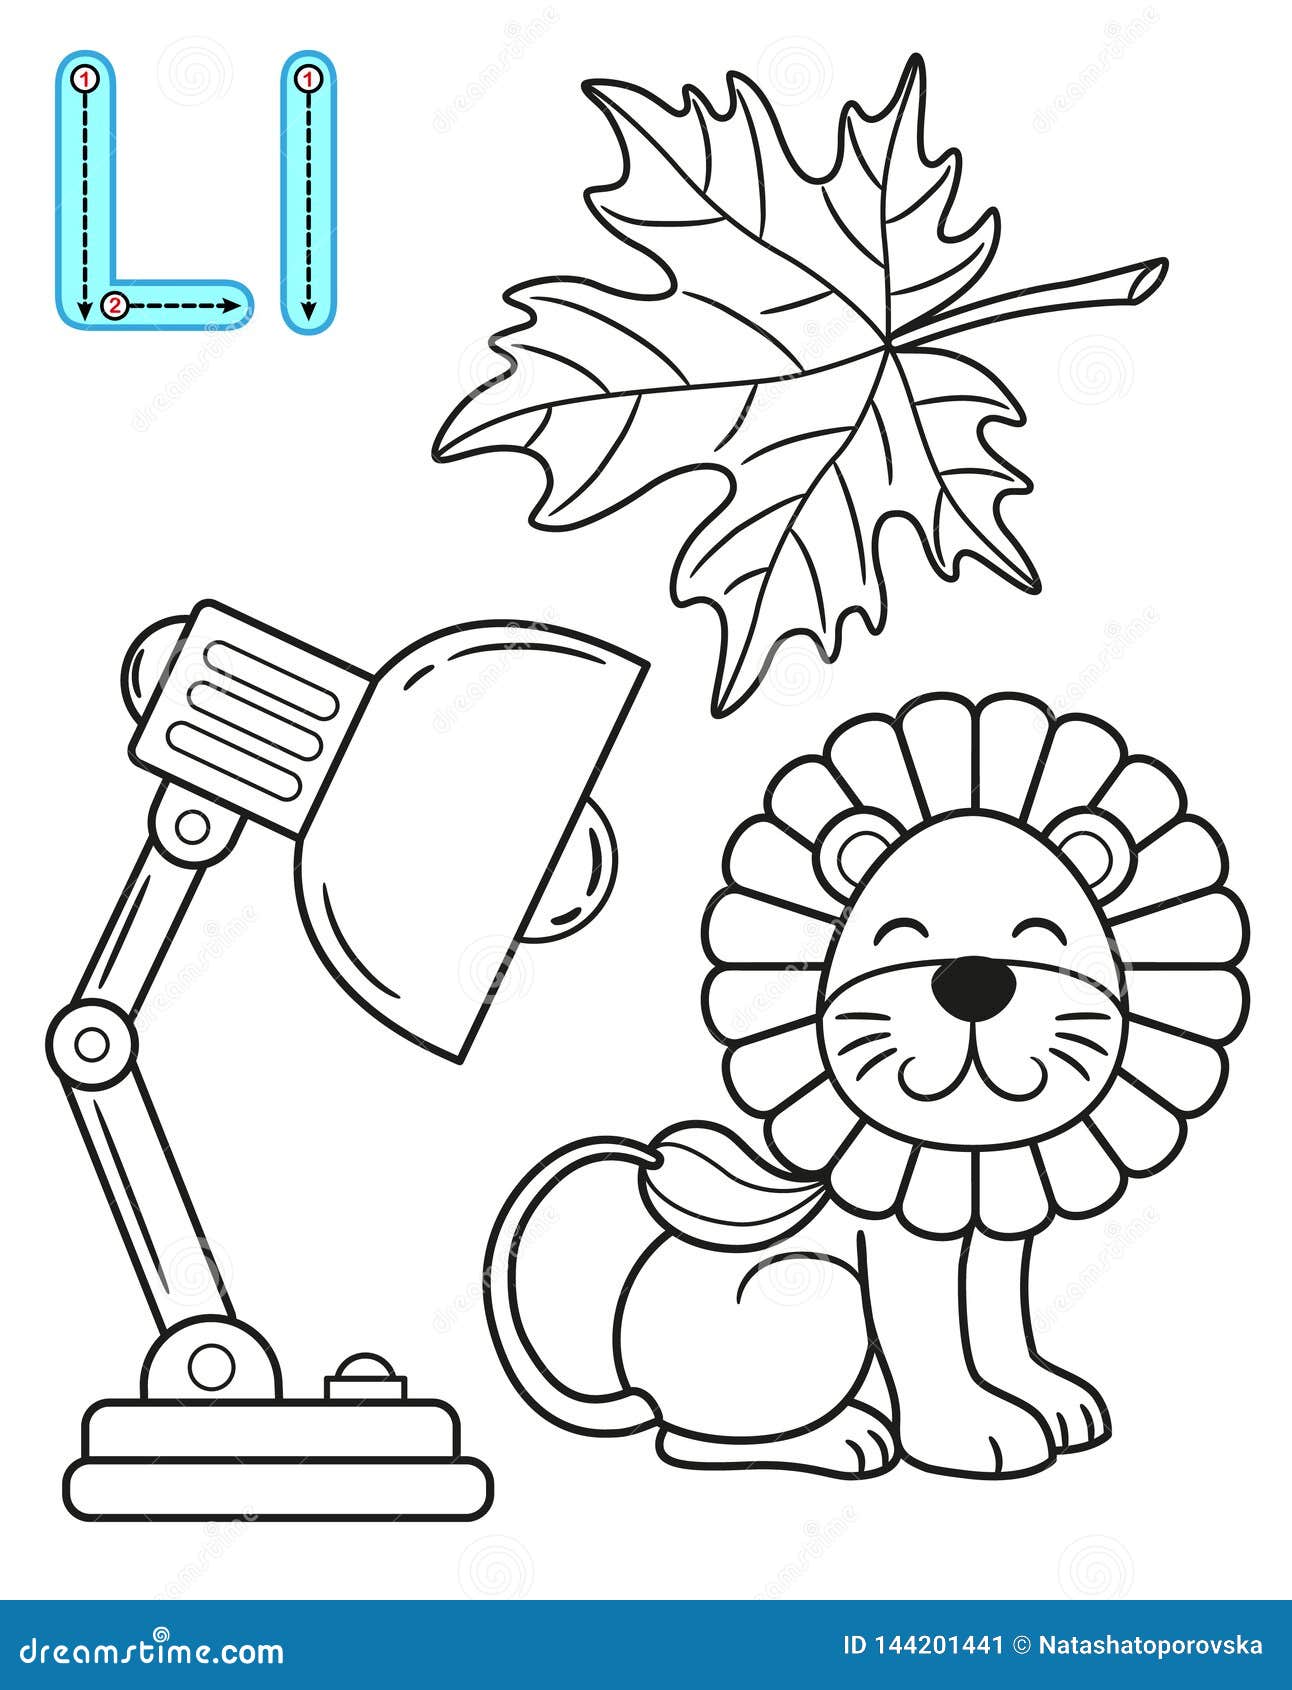 Printable Coloring Page for Kindergarten and Preschool. Card for ...